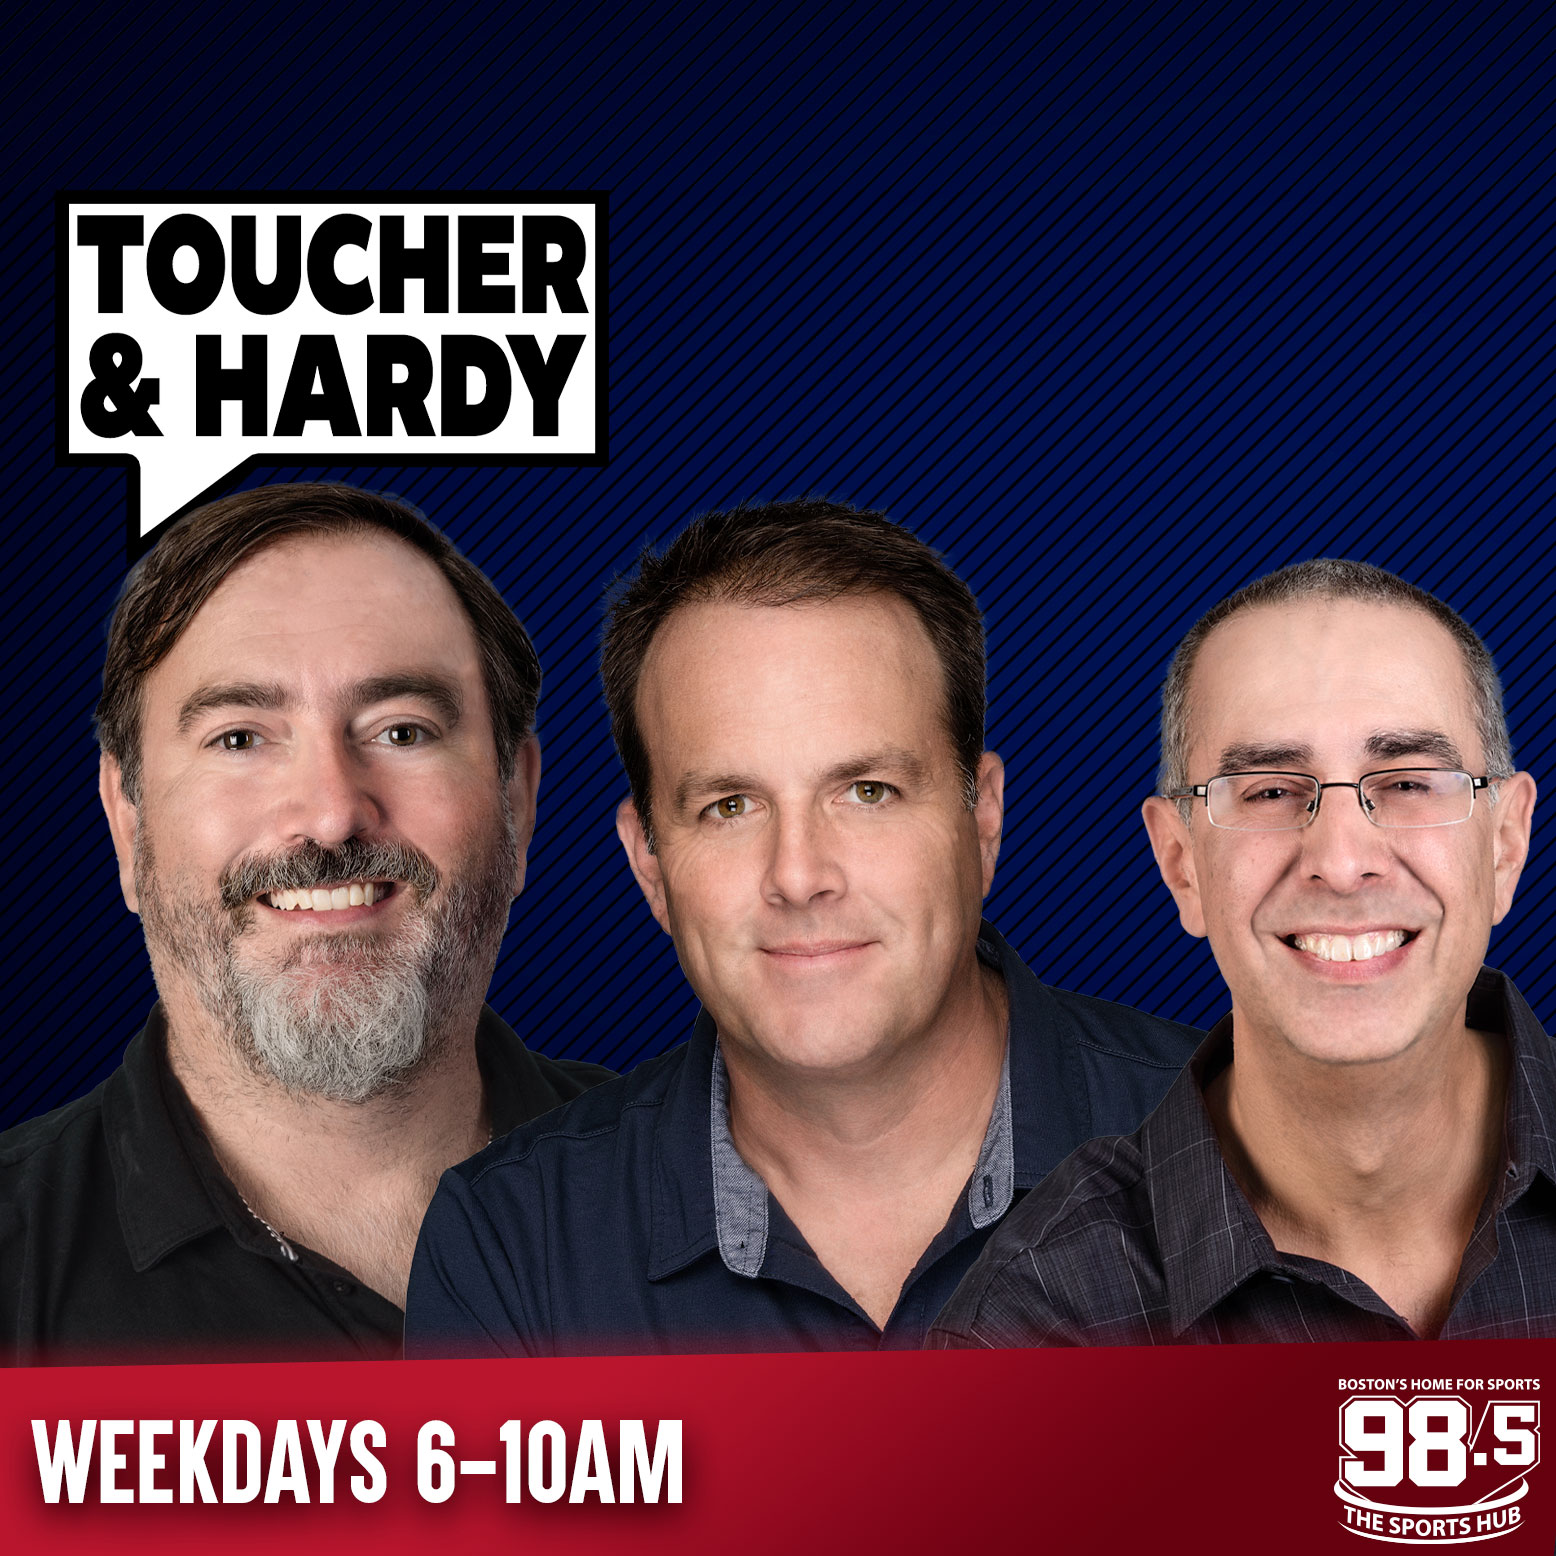 Booze Cruise in the SEC | Hard Knocks and Hard Decisions | Nike to Blame for Jaylen Brown Snub? - 7/11 (Hour 2)